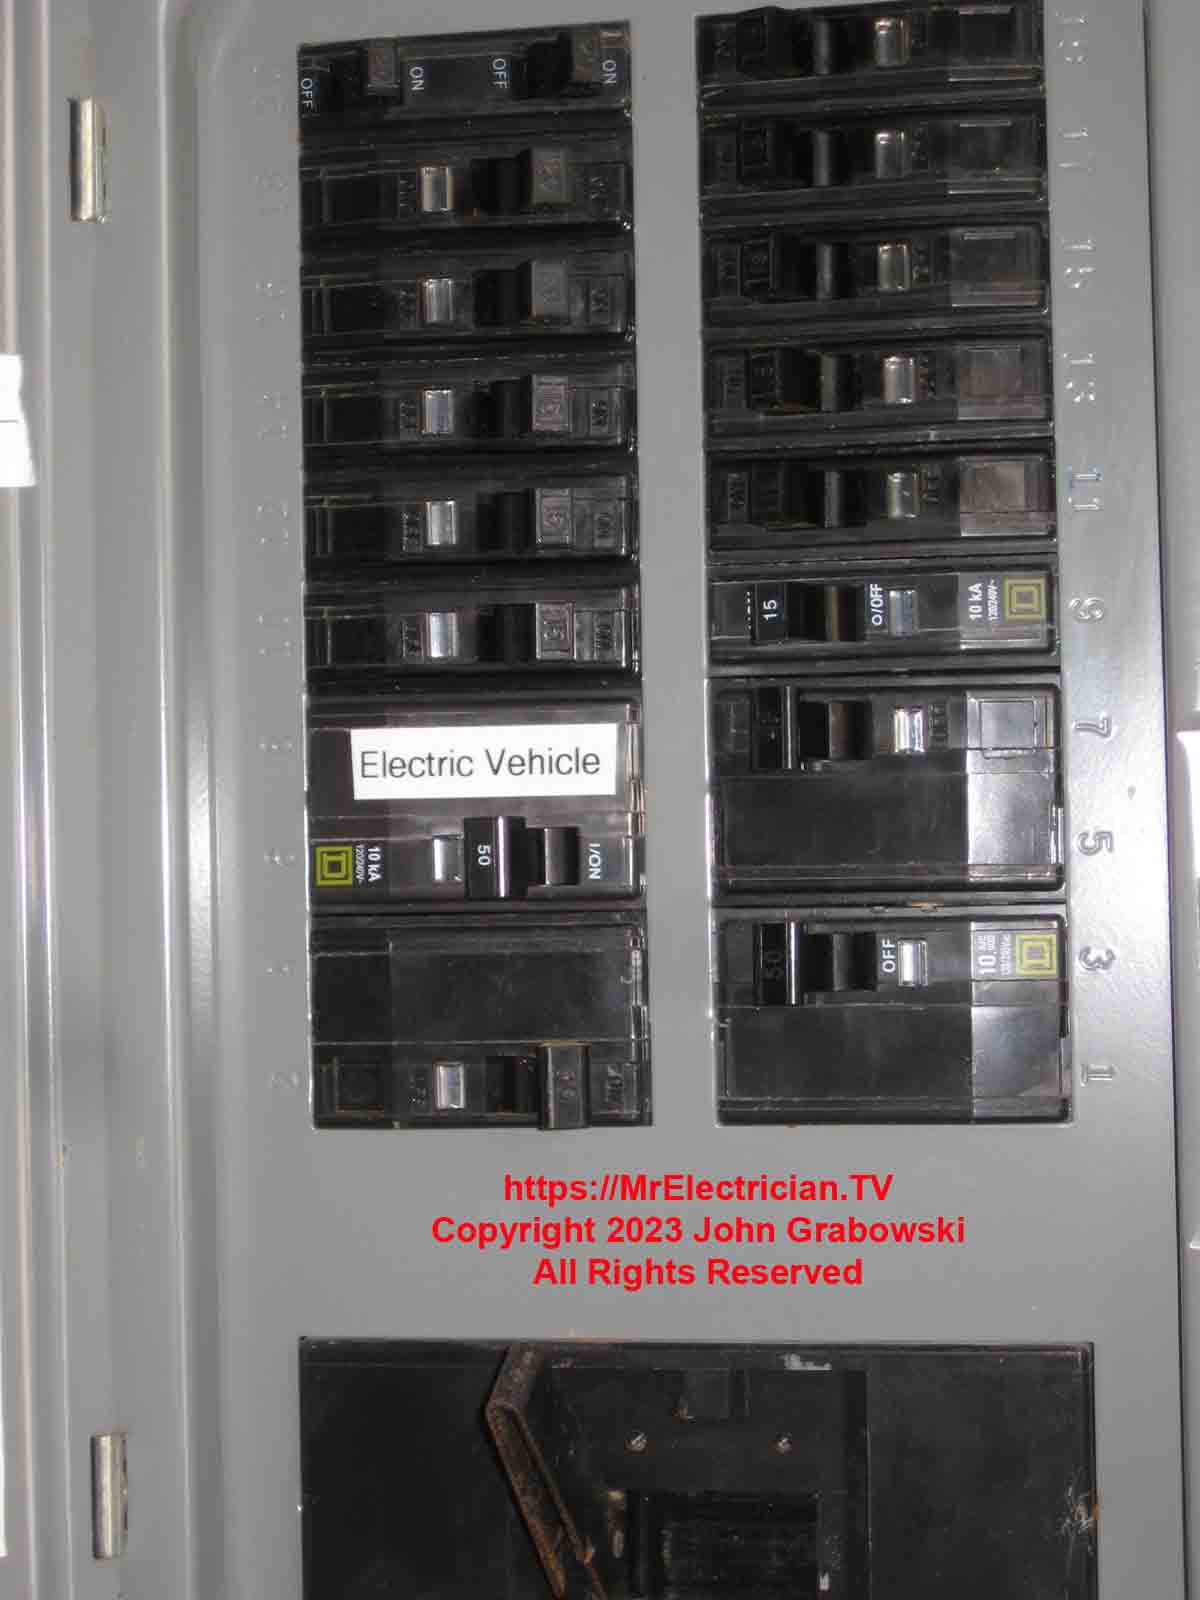 A close shot of the main electrical panel row of circuit breakers with the Tesla EV Charger circuit breaker identified with a P-Touch label.